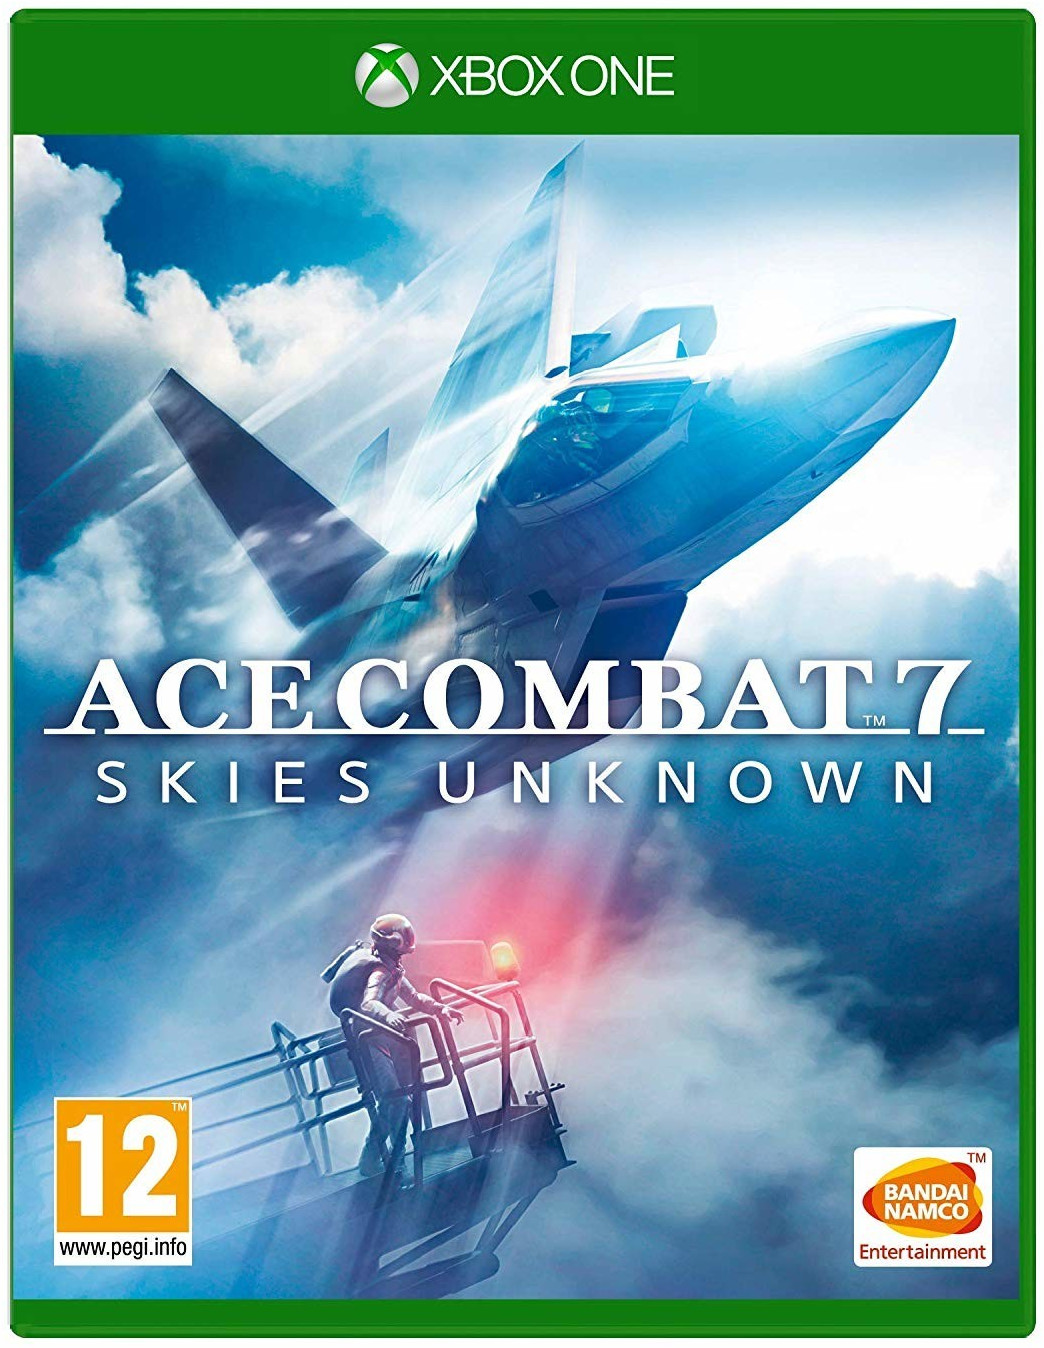 Photos - Game Bandai Namco  Ace Combat 7: Skies Unknown (Xbox One)